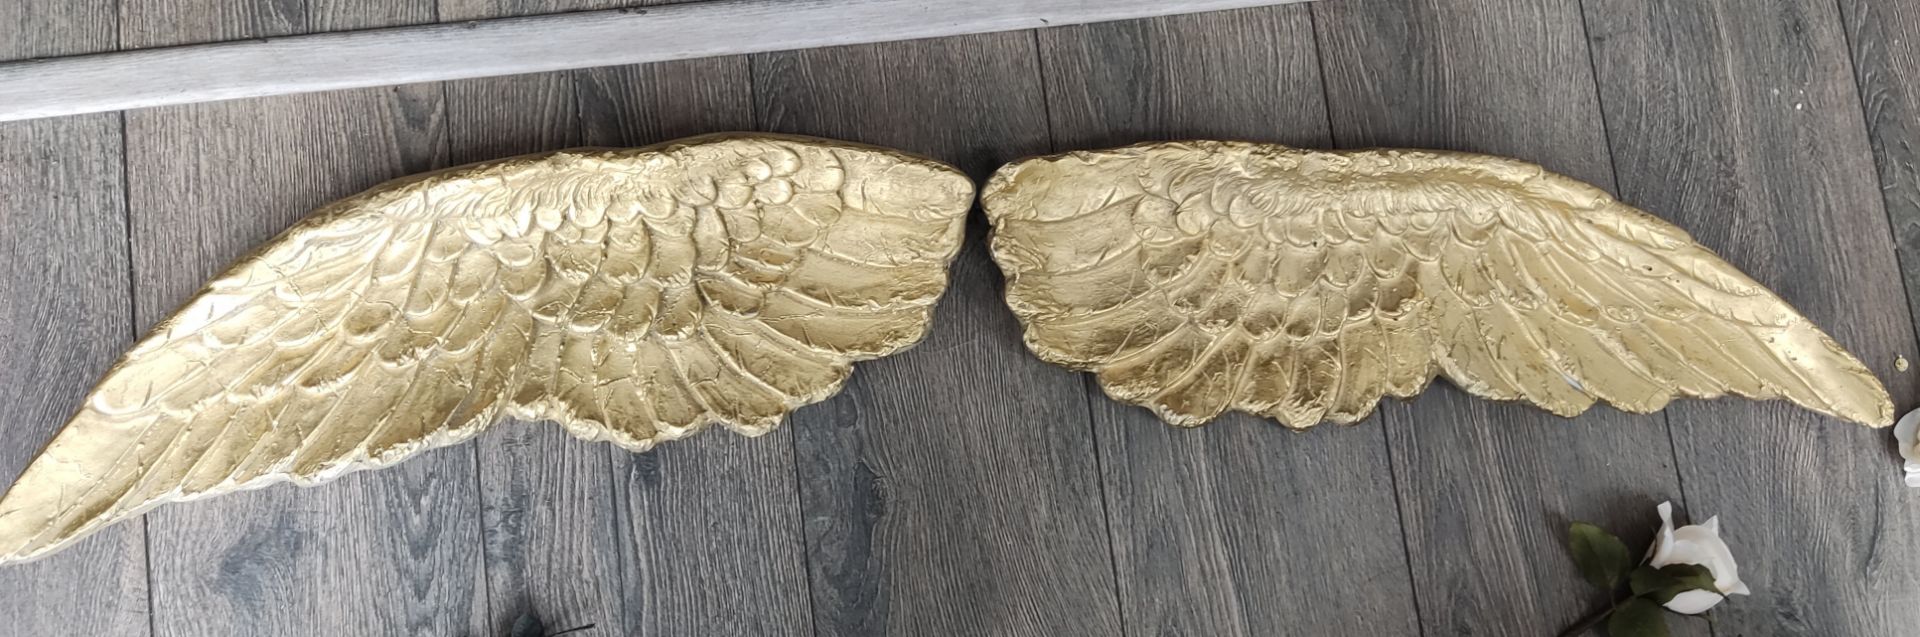 Pair of Gold Angel Wings Wall Décor - LBCTBC - CL763- Location: Sale M33Dimensions: 61cm (l) - Image 2 of 3